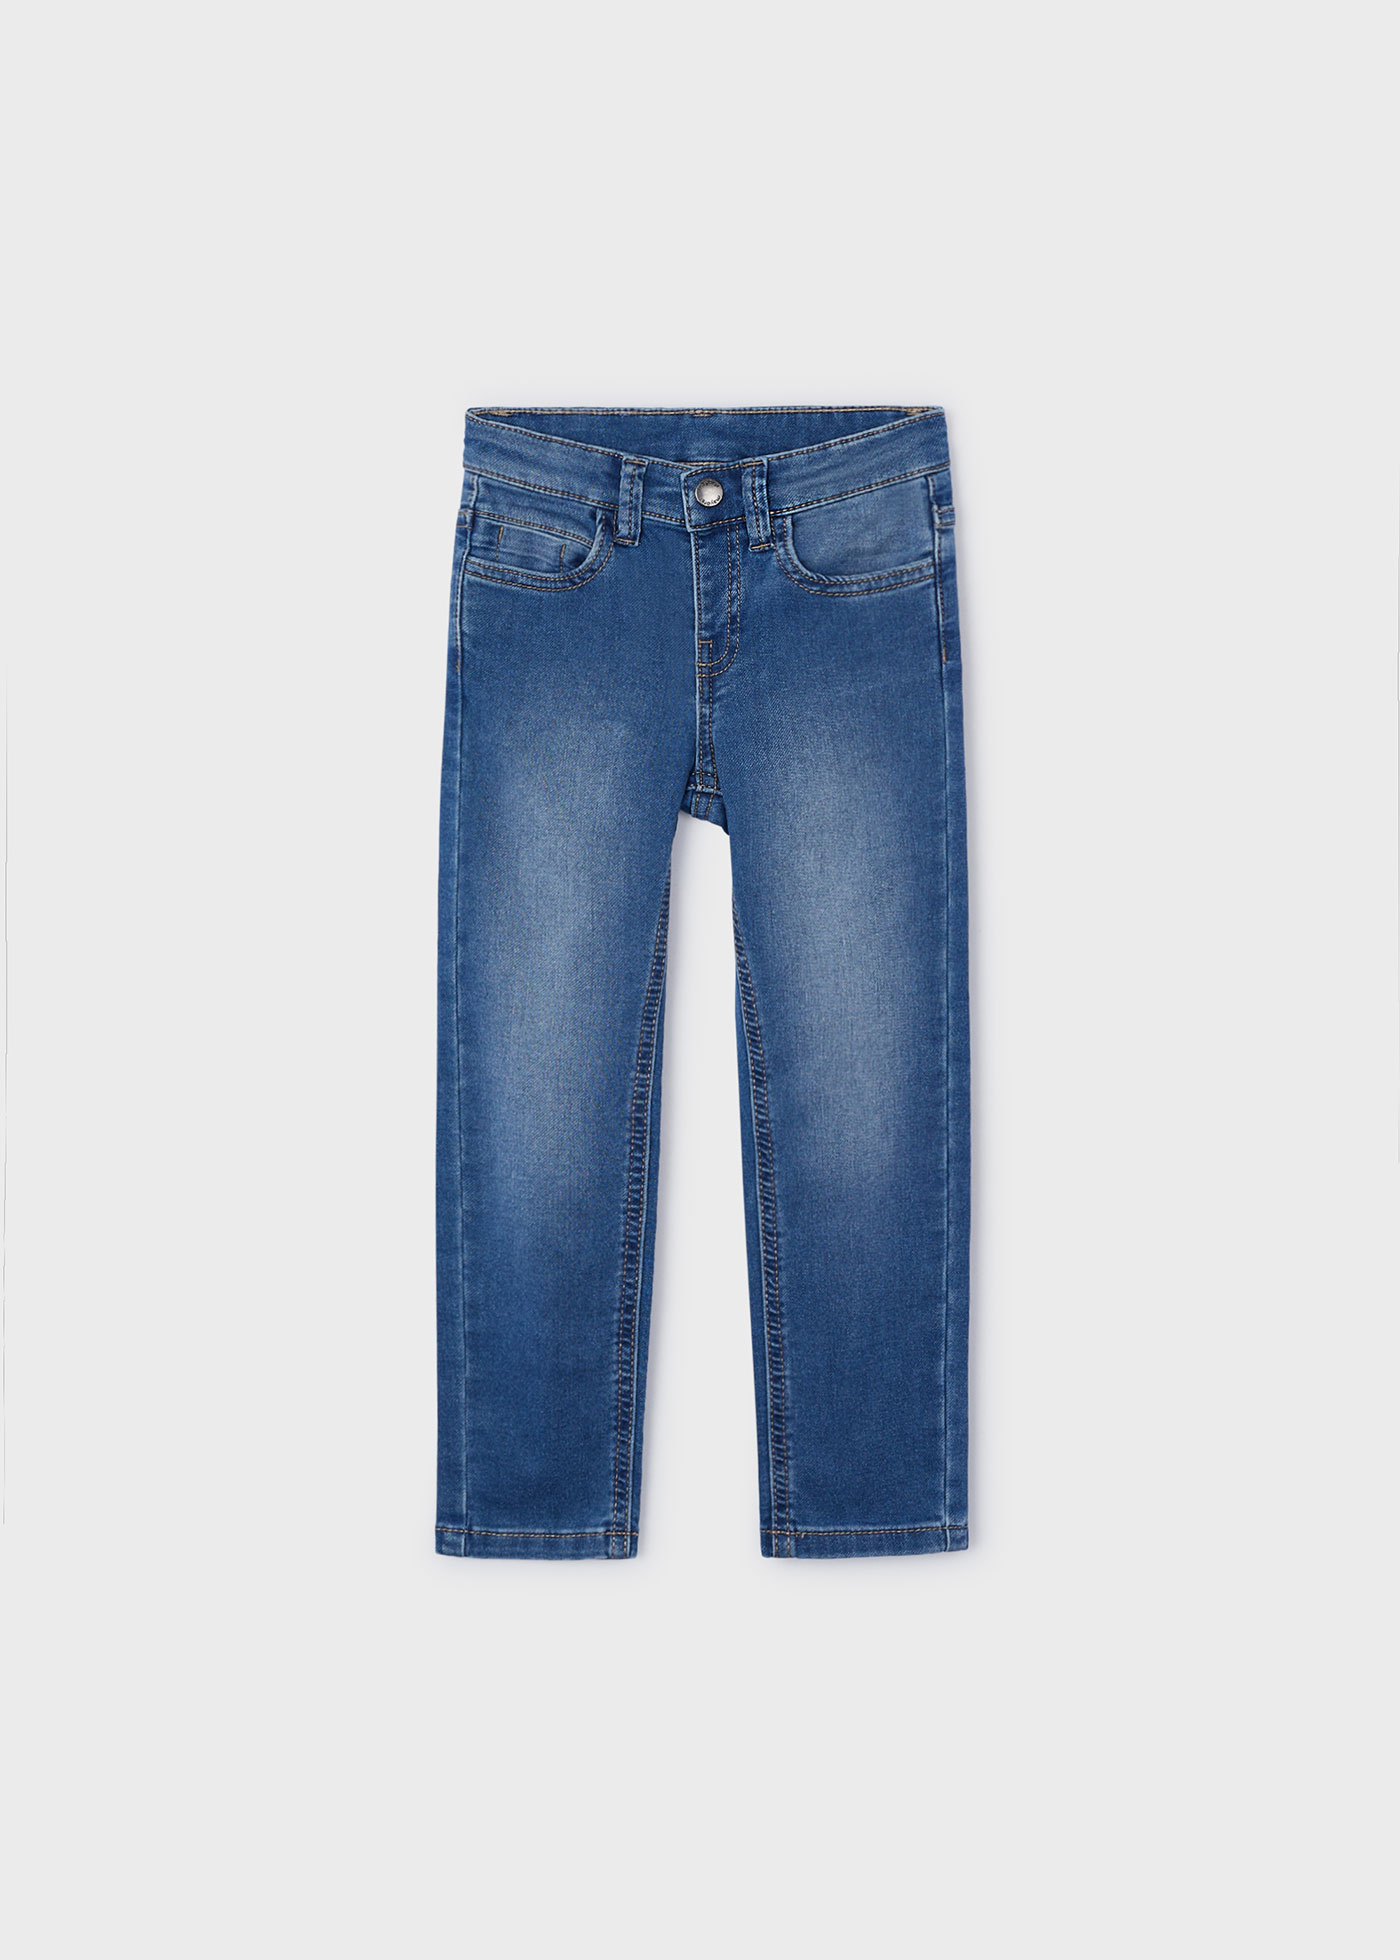 Slim fit jeans for boys